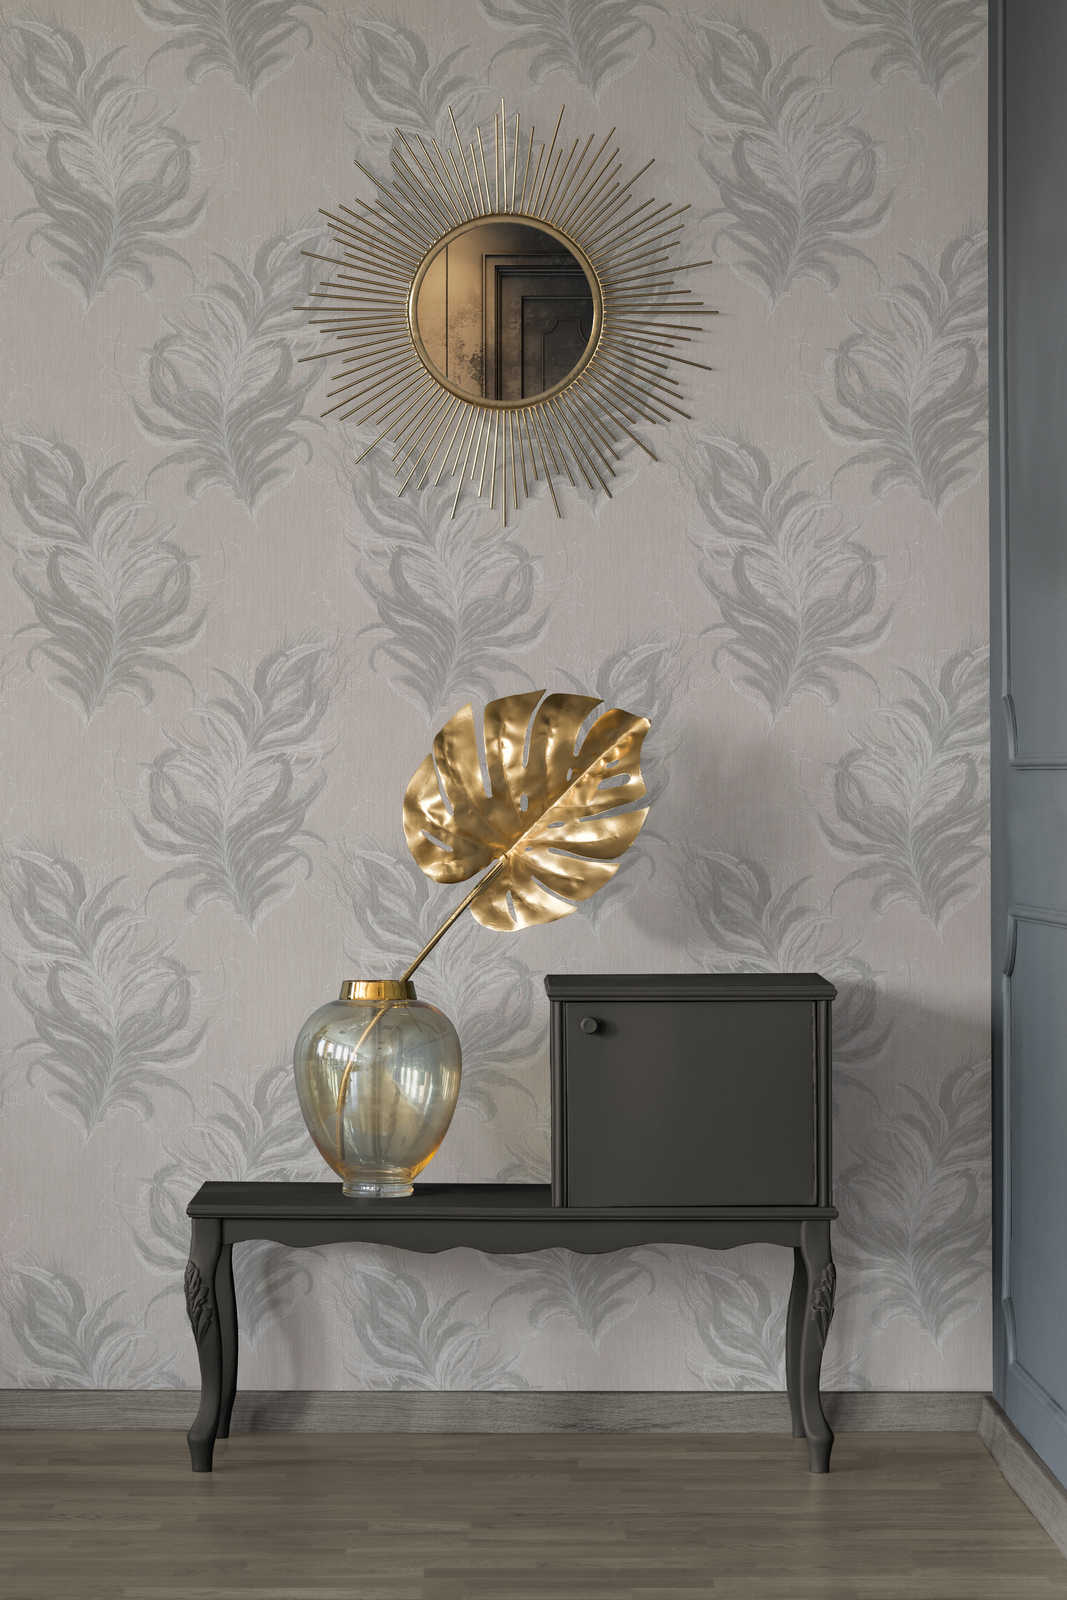             Non-woven wallpaper with feathers design & structure gloss effect - grey, white
        